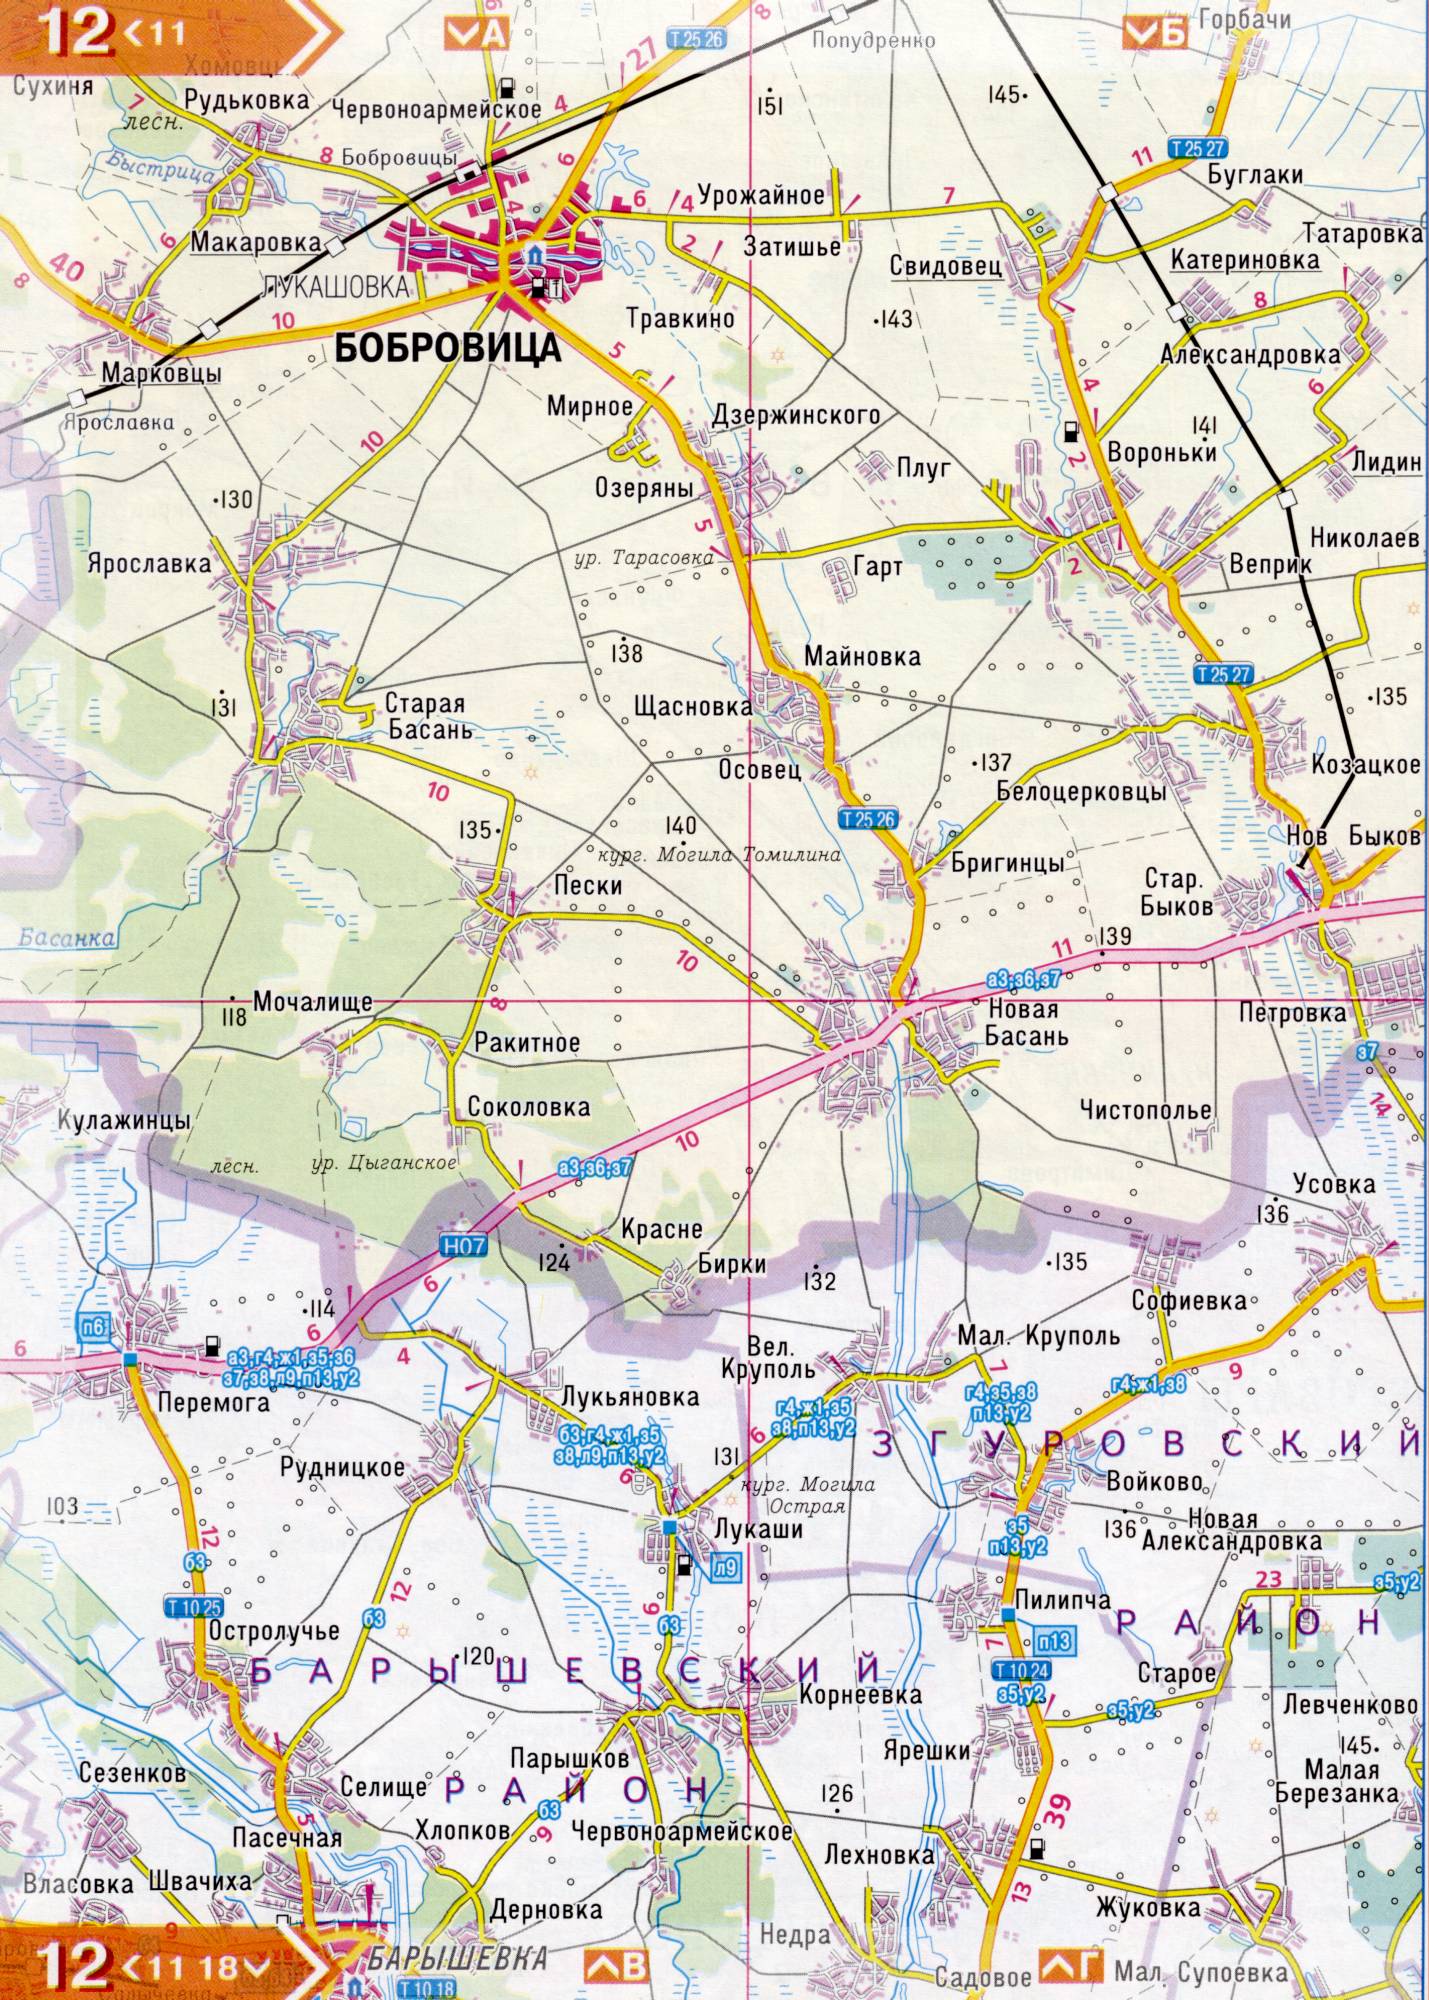 Atlas of the Kiev region. Detailed map of the Kiev region from the road atlas. Kiev region on a detailed map of scale 1cm = 3km. Free Download, E2